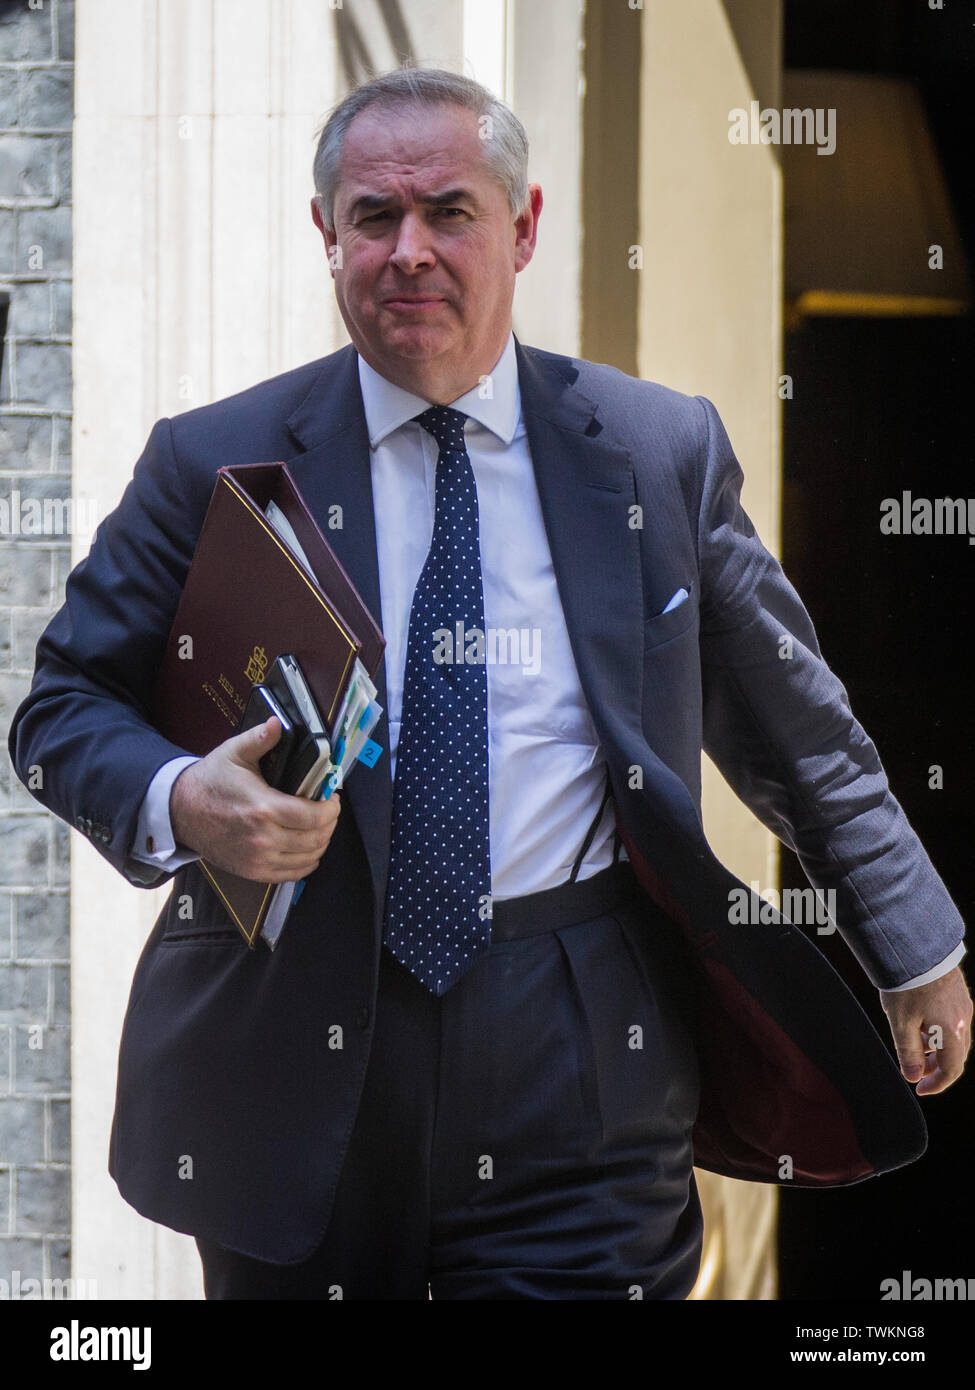 Ministers Depart Downing Street following cabinet meeting. Featuring: Geoffrey Cox QC MP Where: London, United Kingdom When: 21 May 2019 Credit: Wheatley/WENN Stock Photo